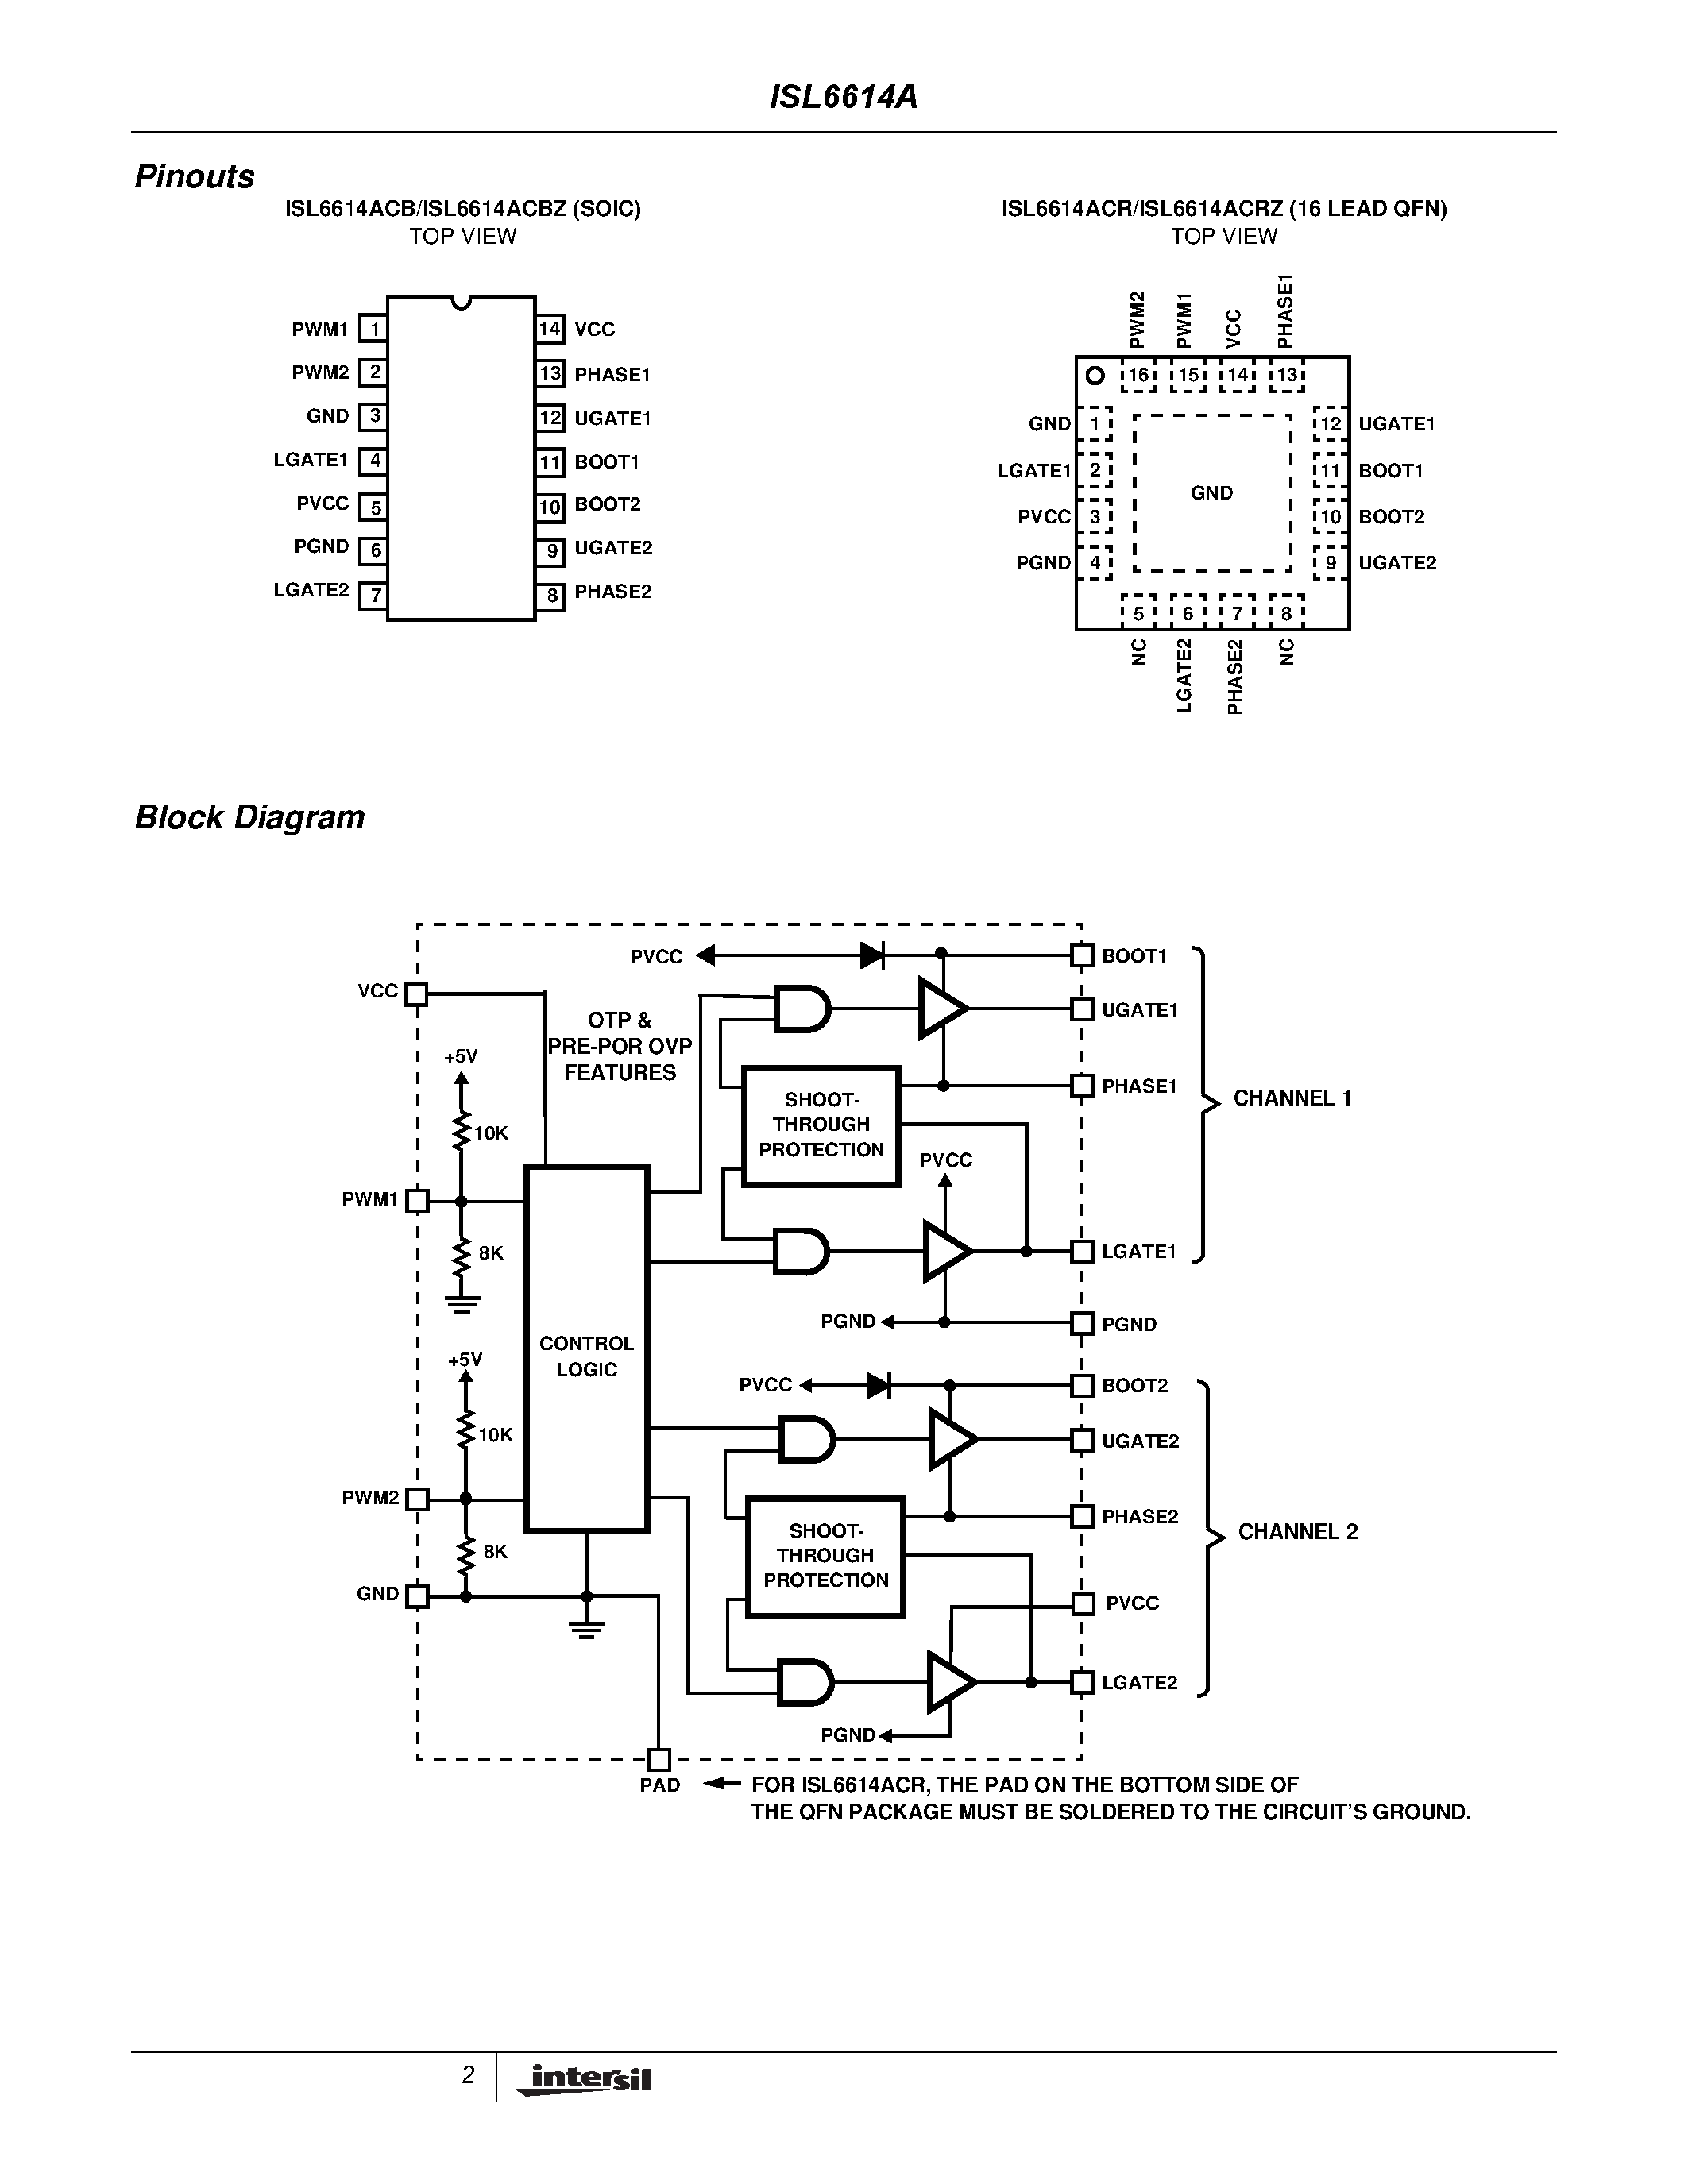 Datasheet ISL6614ACR-T - Dual Advanced Synchronous Rectified Buck MOSFET Drivers with Pre-POR OVP page 2